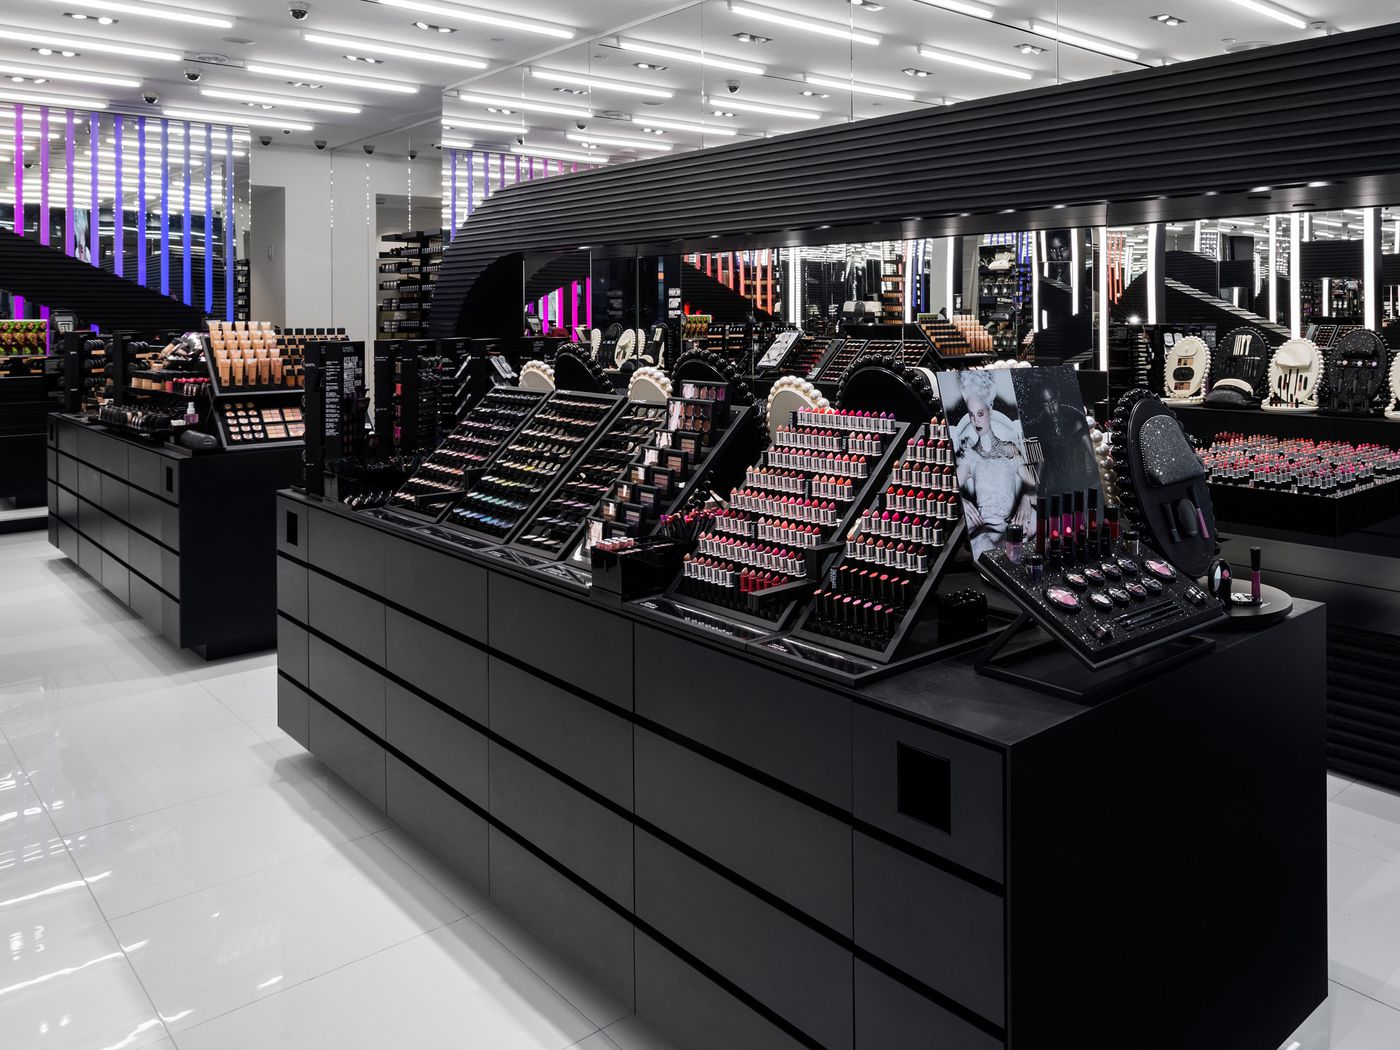 Why Do So Many Beauty Stores Look and the Same? - Racked